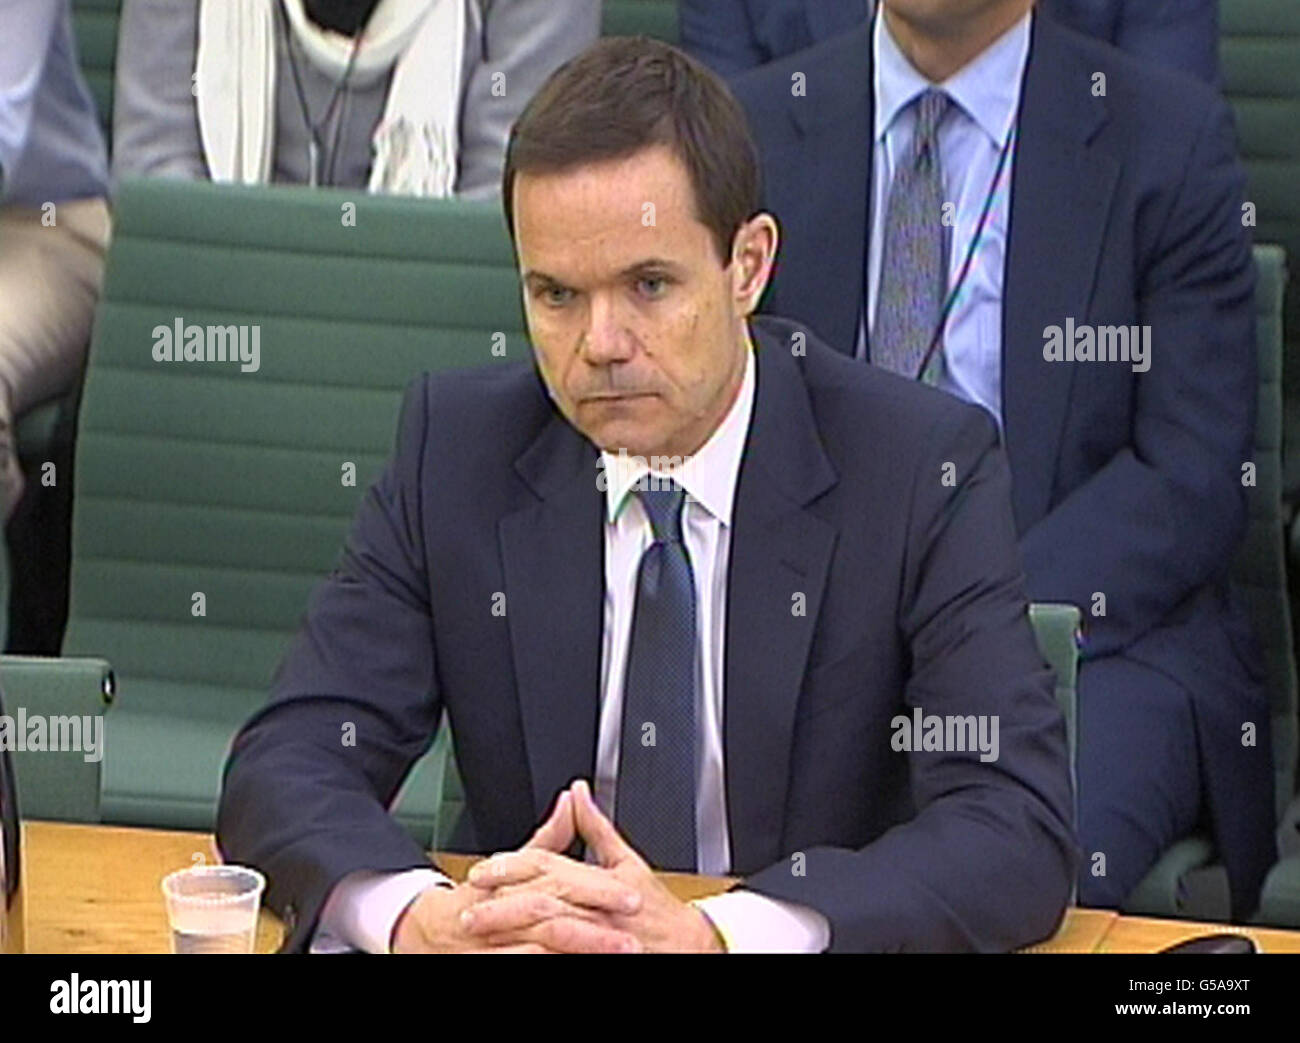 Jerry del Missier der ehemalige Chief Operating Officer, Barclays plc, der dem Treasury Select Committee im House of Commons, London, Beweise gibt. Stockfoto